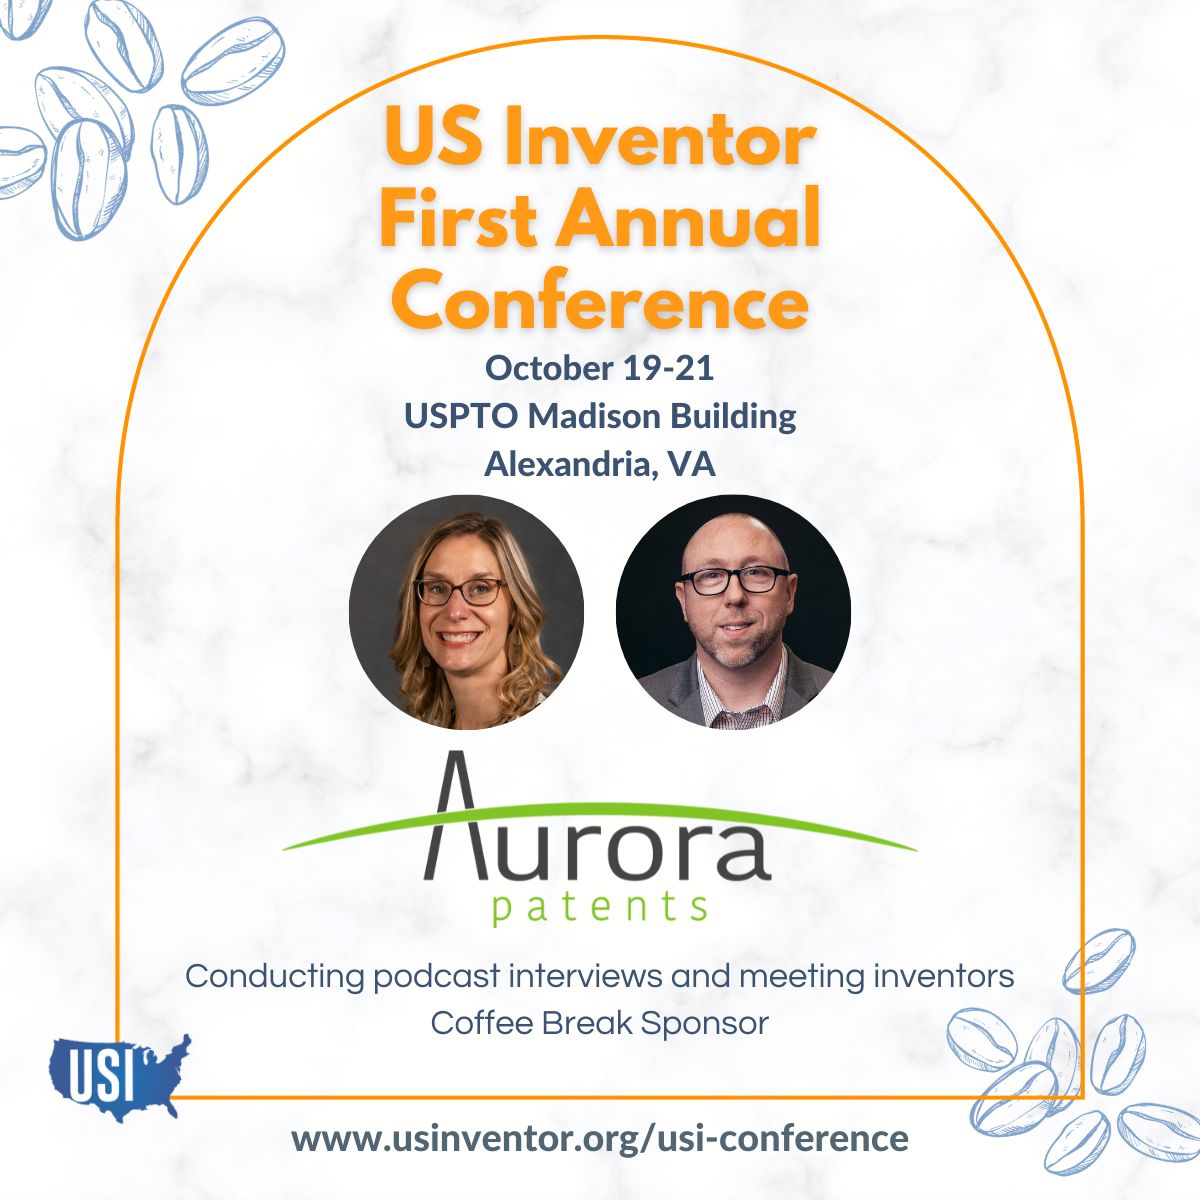 We're happy to announce that @AuroraPatents is attending the US Inventor First Annual Conference. Not only are they providing delicious coffee, but they will also be conducting podcast interviews and meeting inventors! Register and view the agenda here: usinventor.org/usi-conference